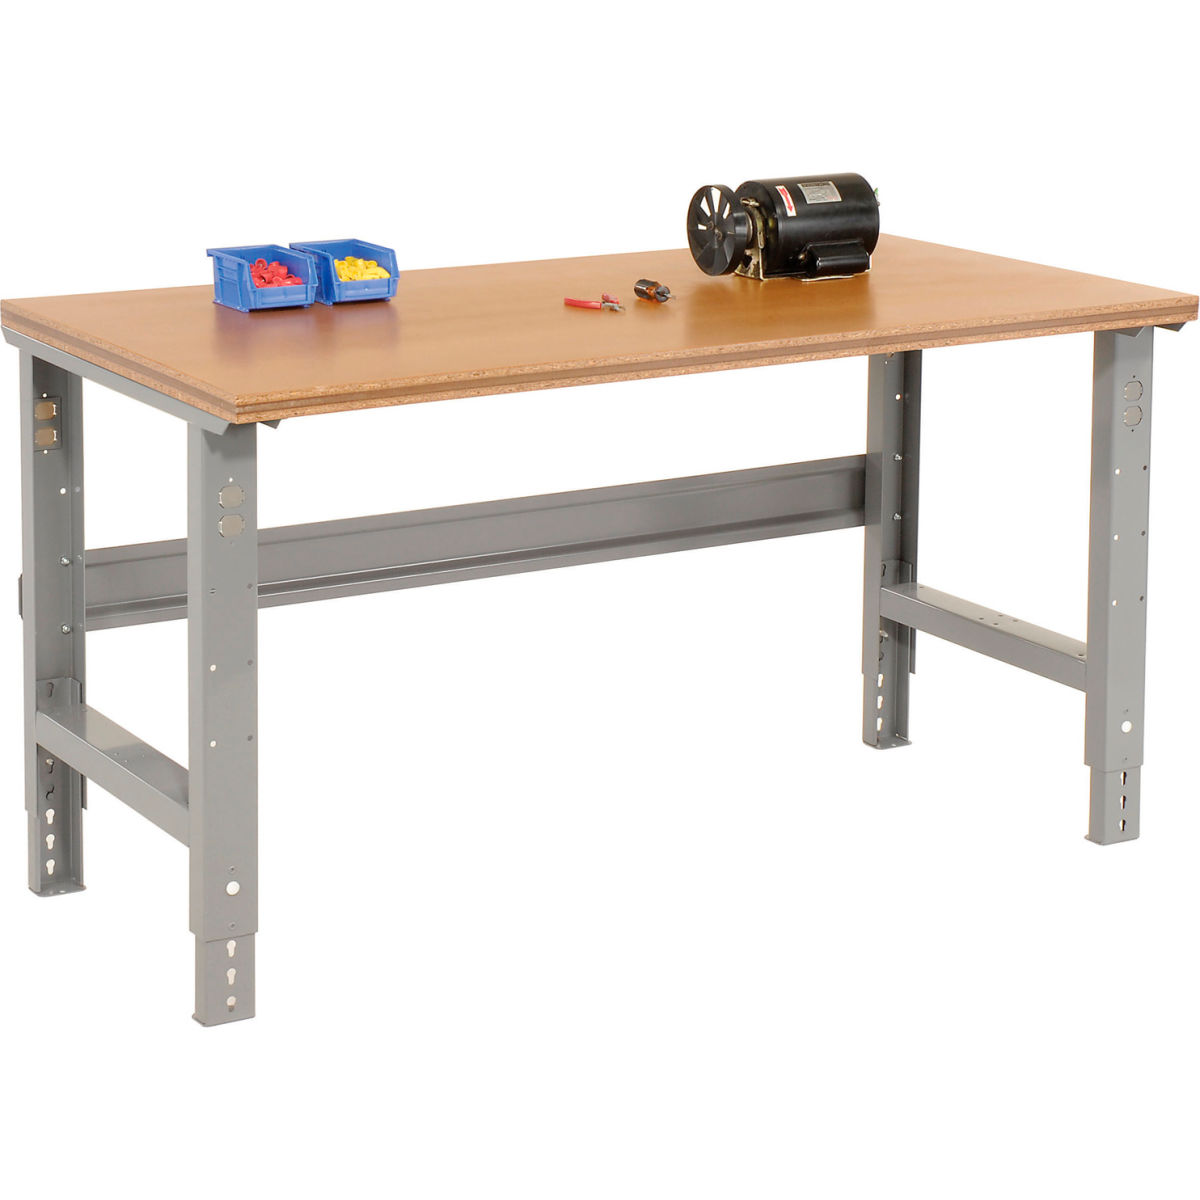 Cromo C-Channel Leg&#44; Shop Top Square Edge Adjustable Height Workbench&#44; Gray - 60 x 36 in.